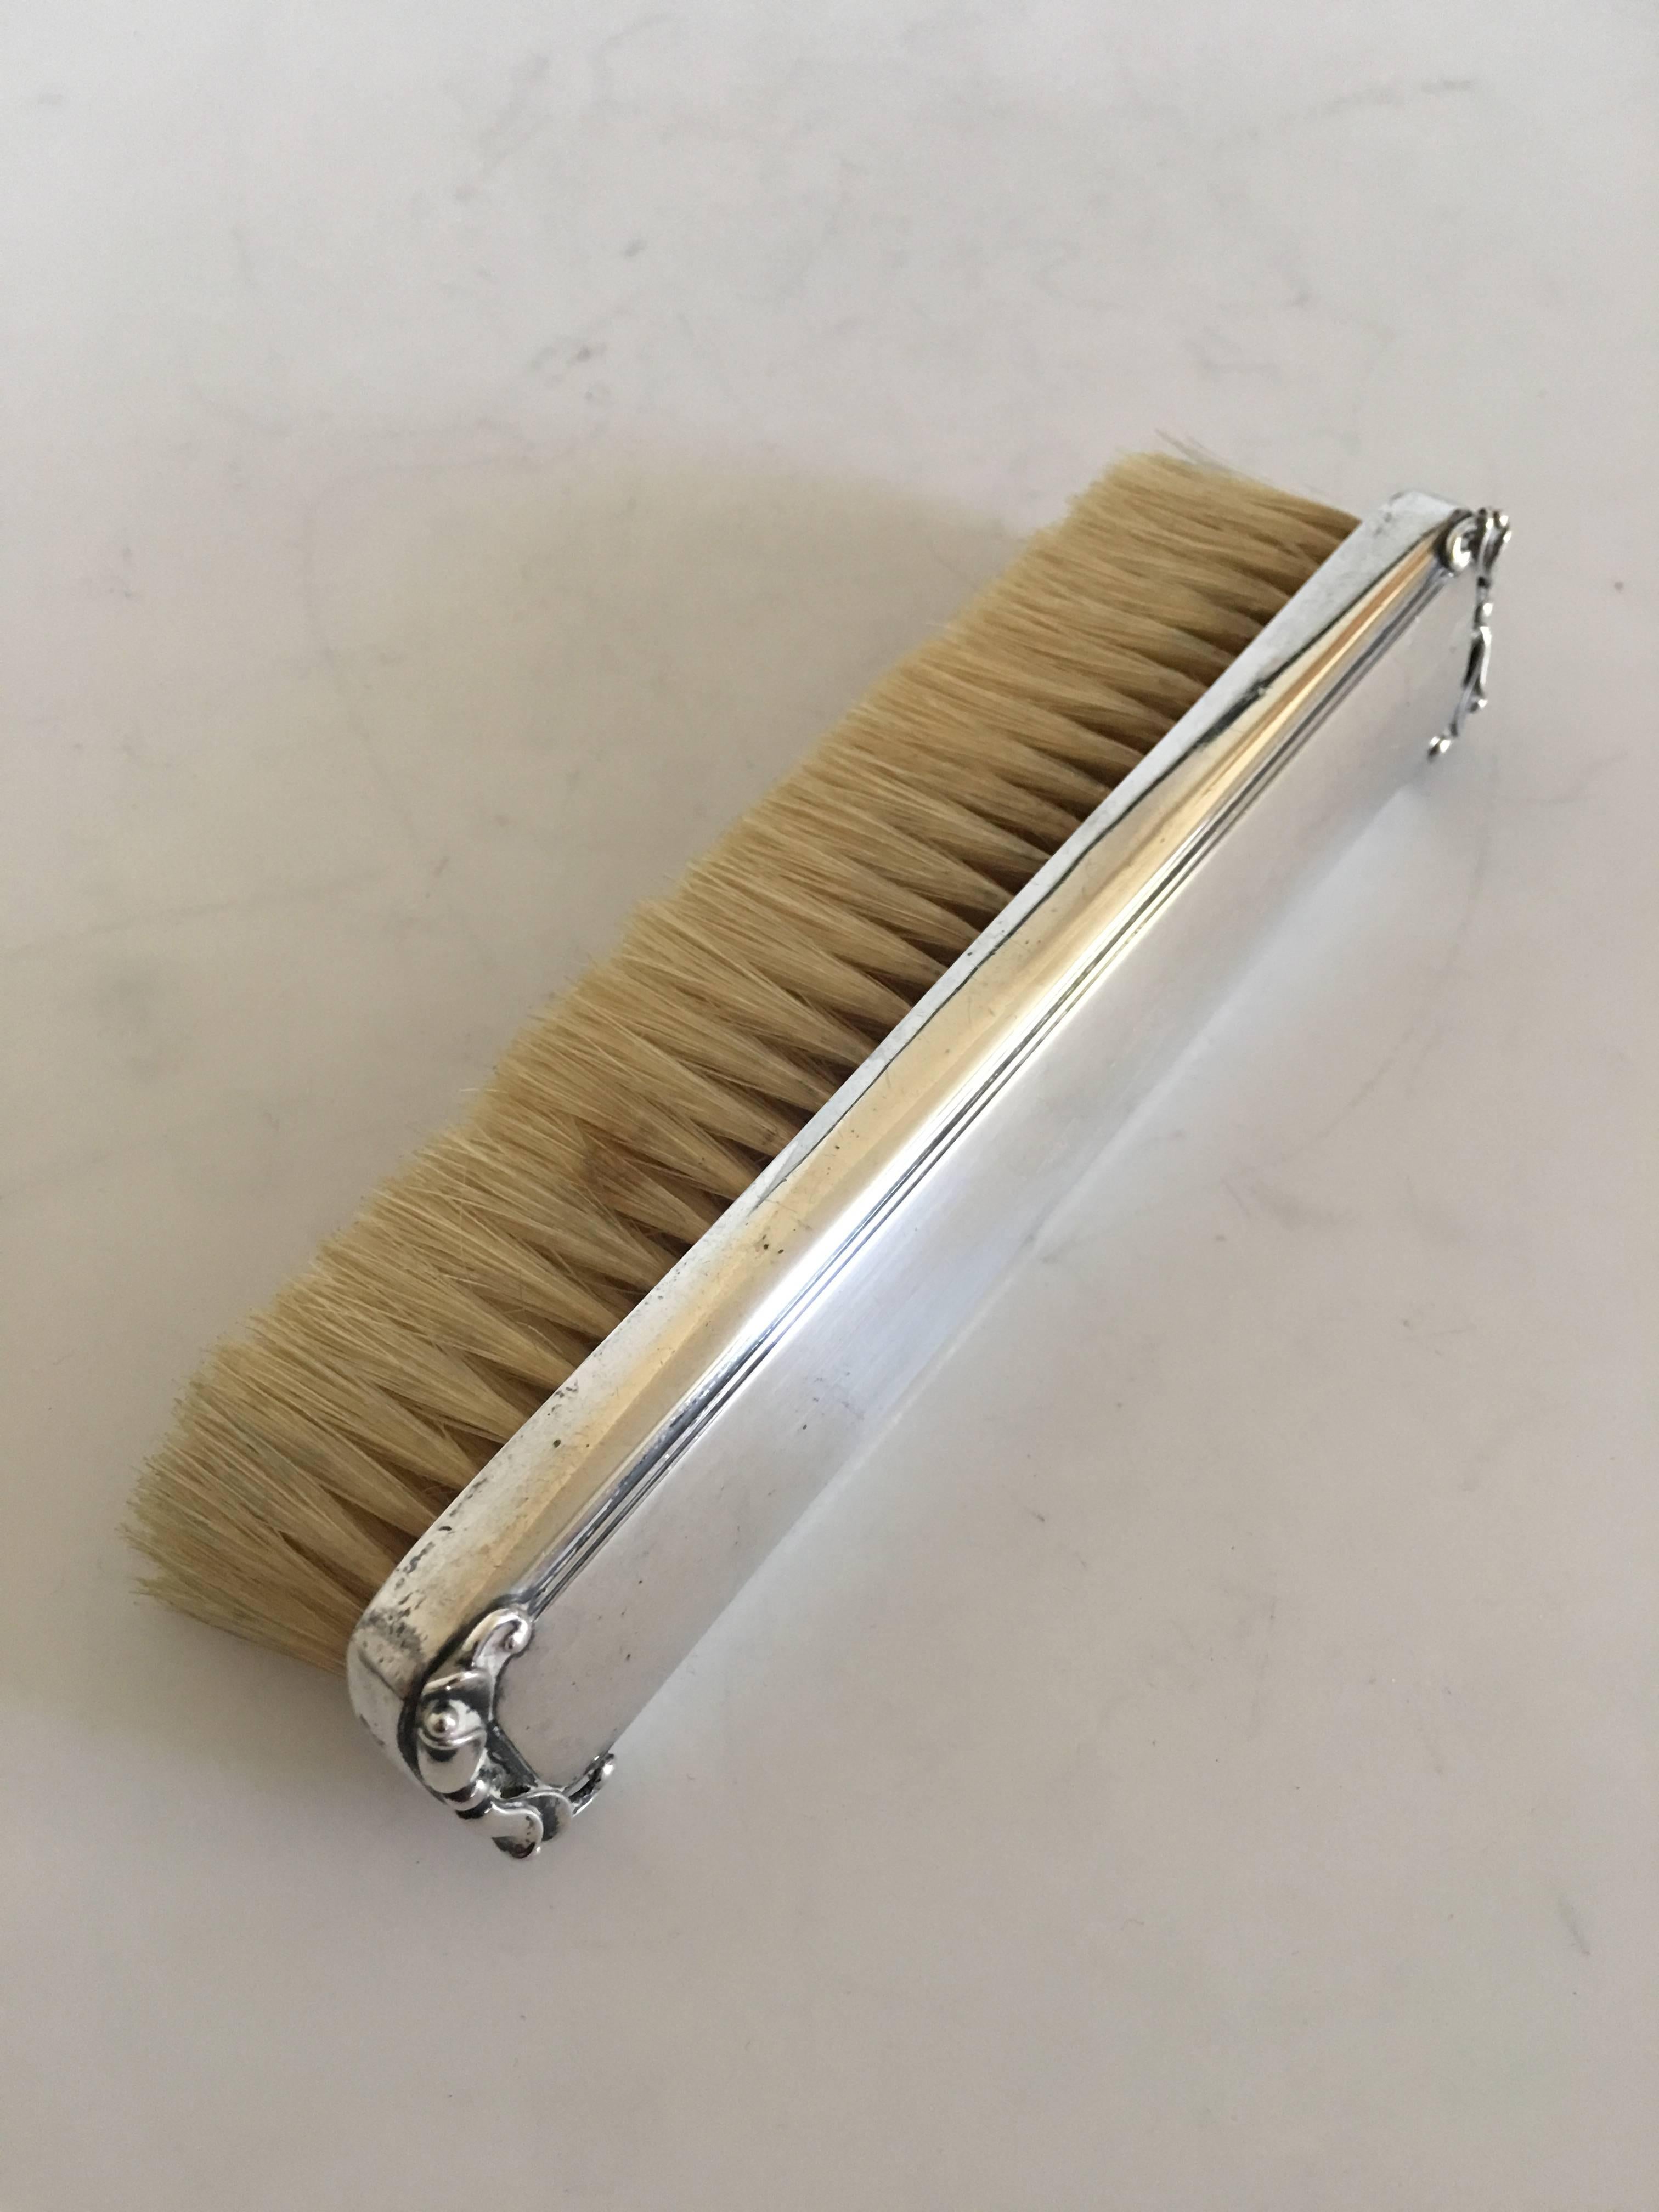 Georg Jensen brush no. 172 with sterling silver handle. Measure: 16.5 cm L (6 1/2